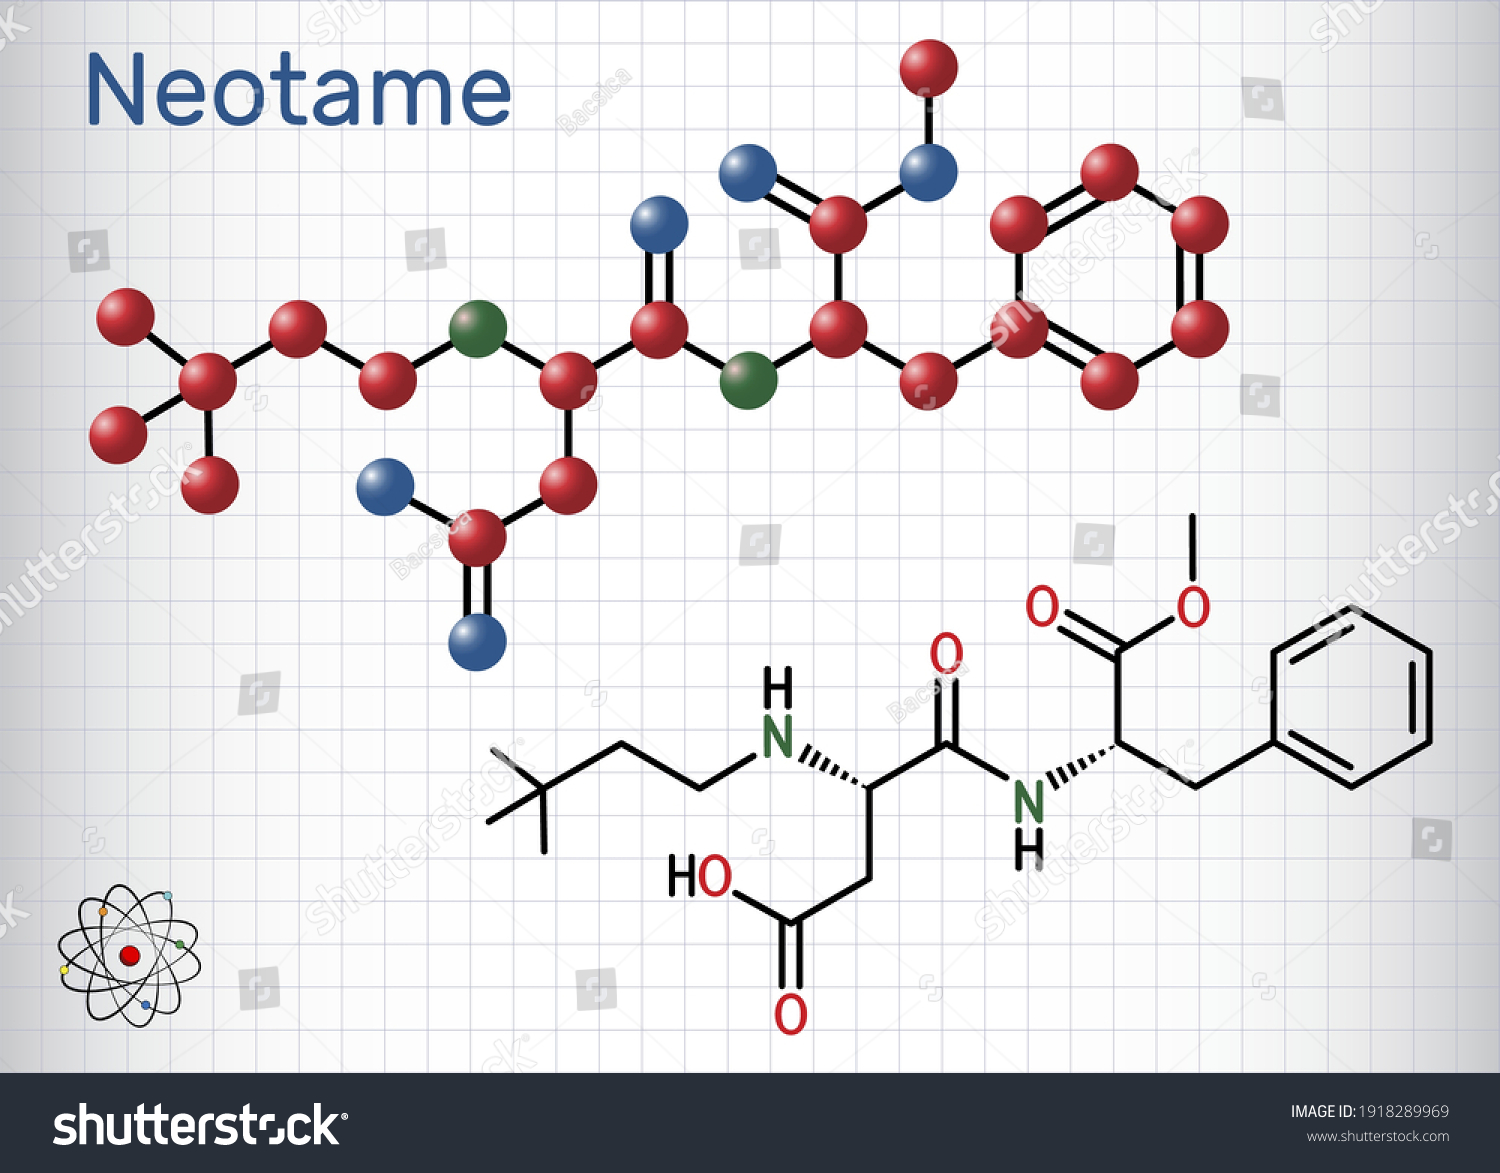 SVG of Neotame, sweetening agent, E961molecule. It is dipeptide with peptide linkage, artificial sweetener, aspartame analog. Sheet of paper in a cage. Vector illustration svg